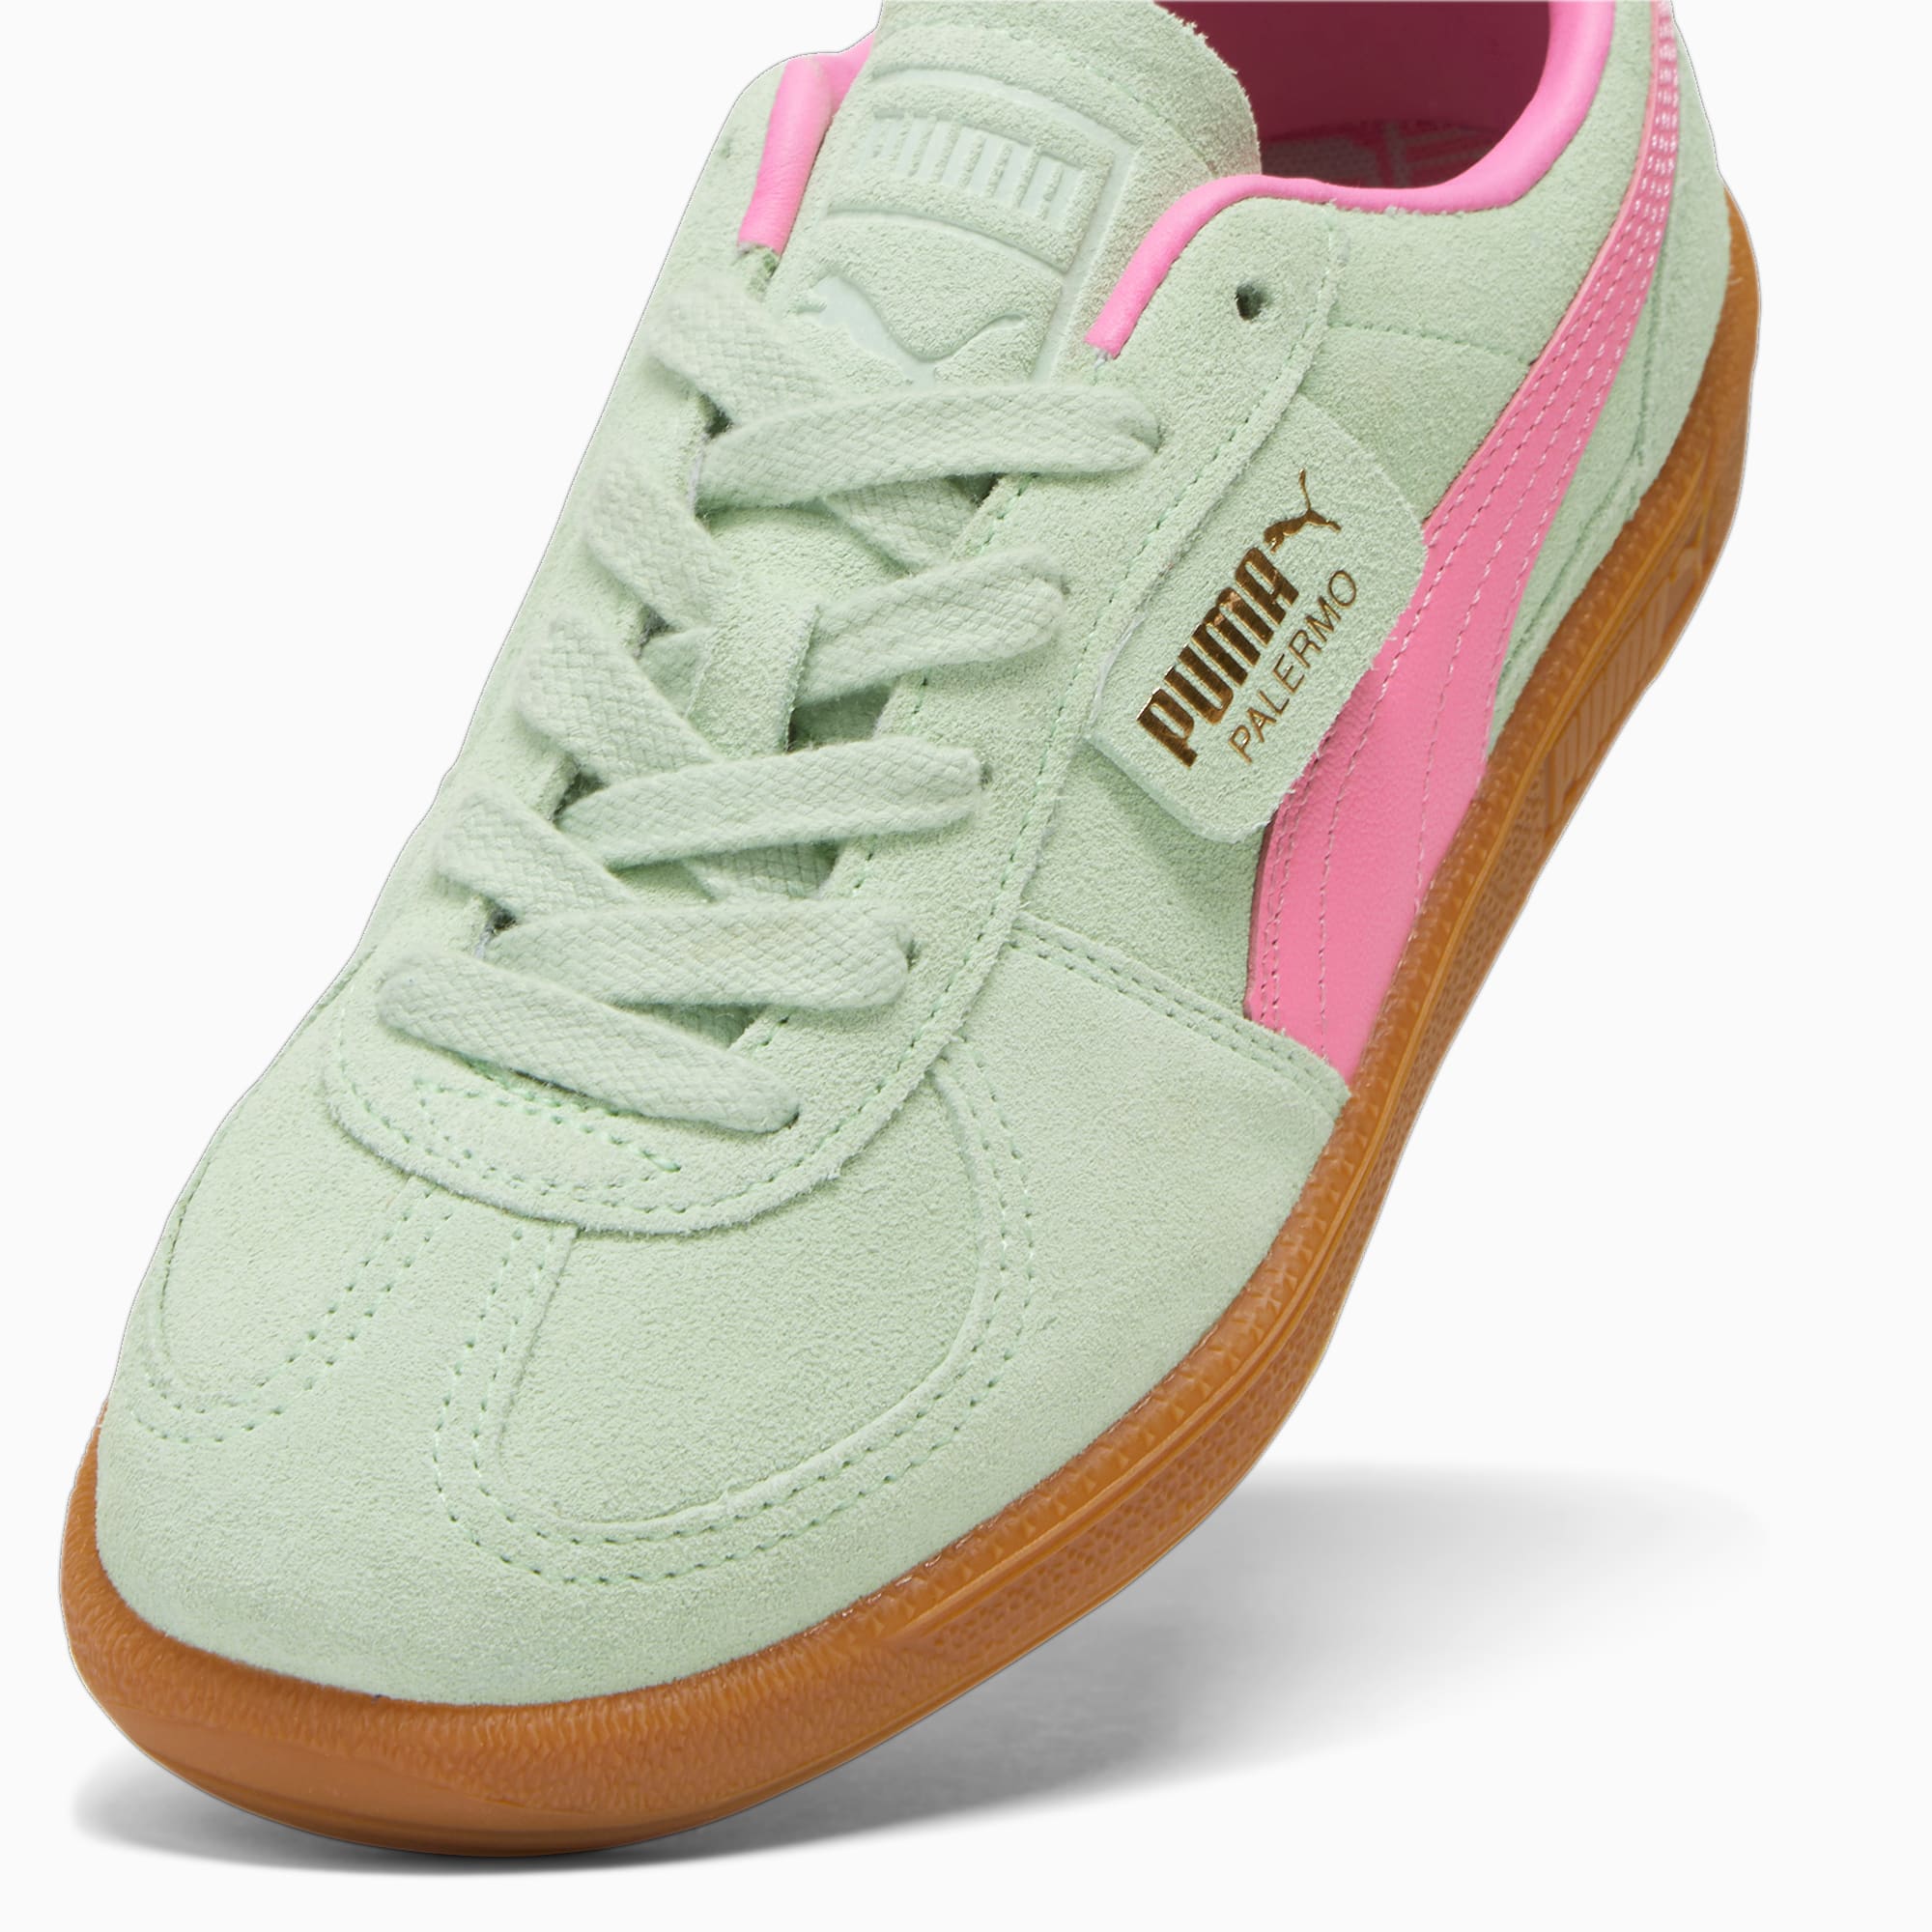 PUMA Chaussure Sneakers Palermo, Rose